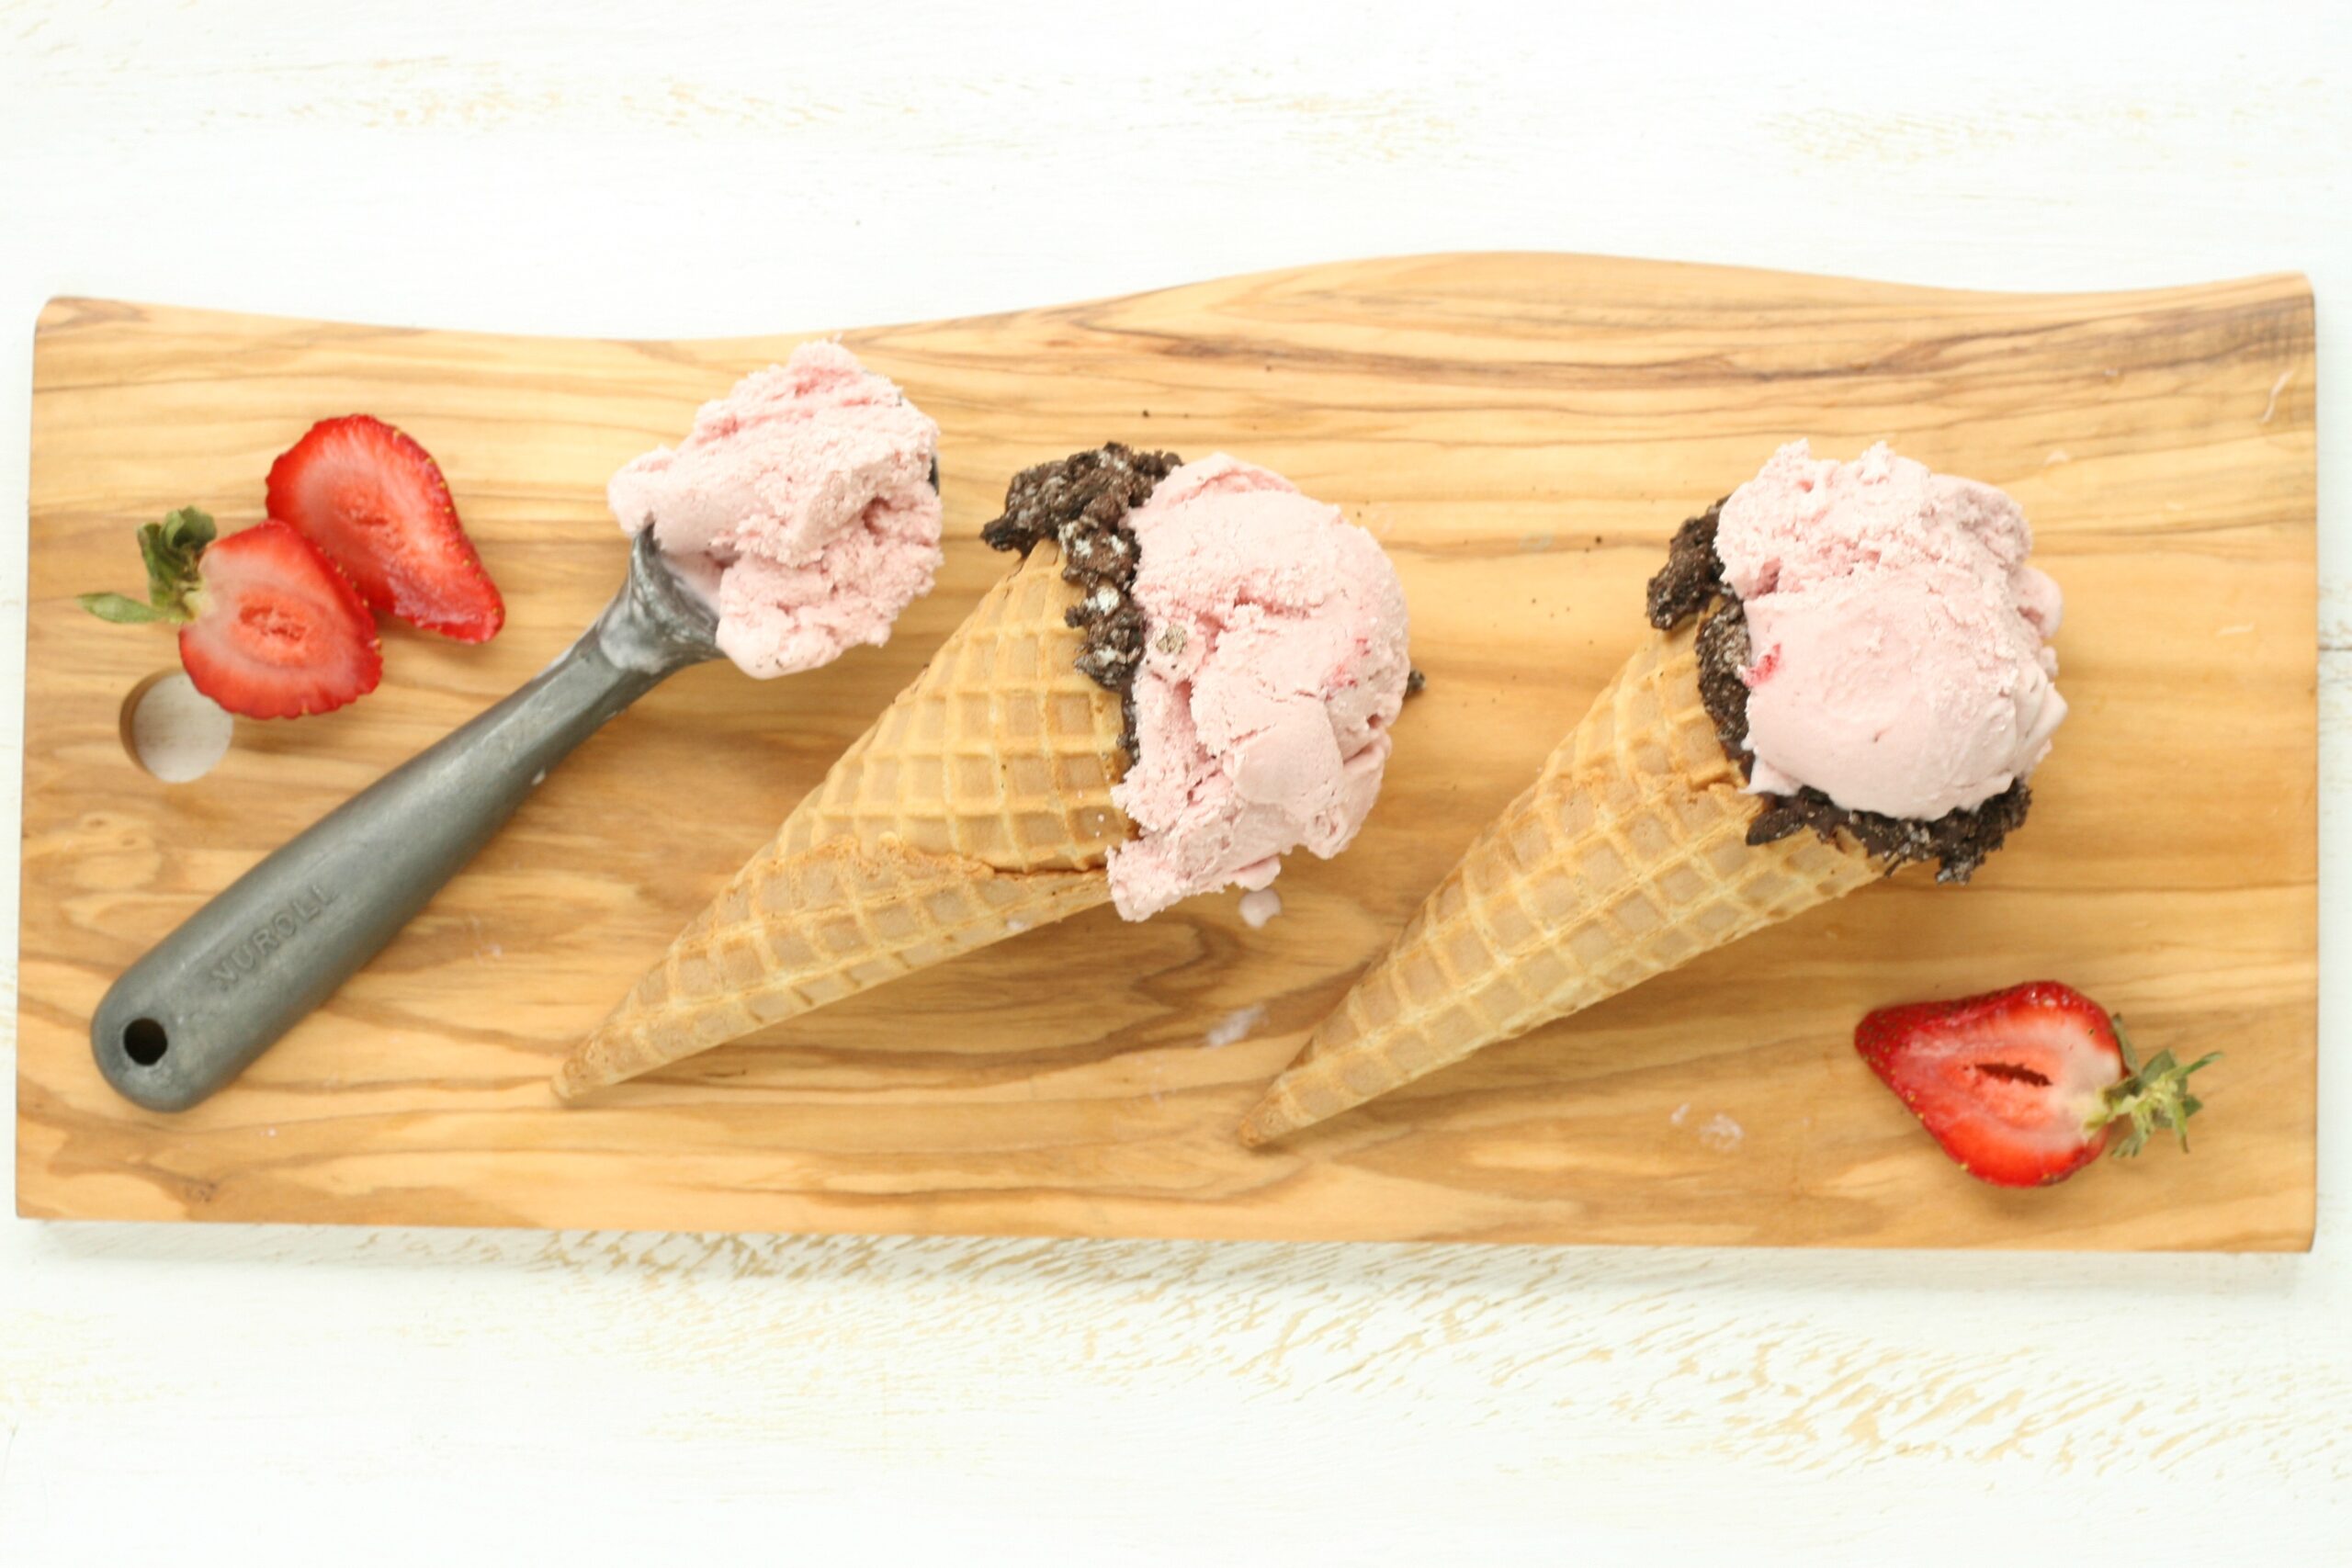 vintage ice cream scoop with strawberry ice cream and two waffle cones dipped in chocolate and crushed Oreo cookies sitting on wooden cutting board.